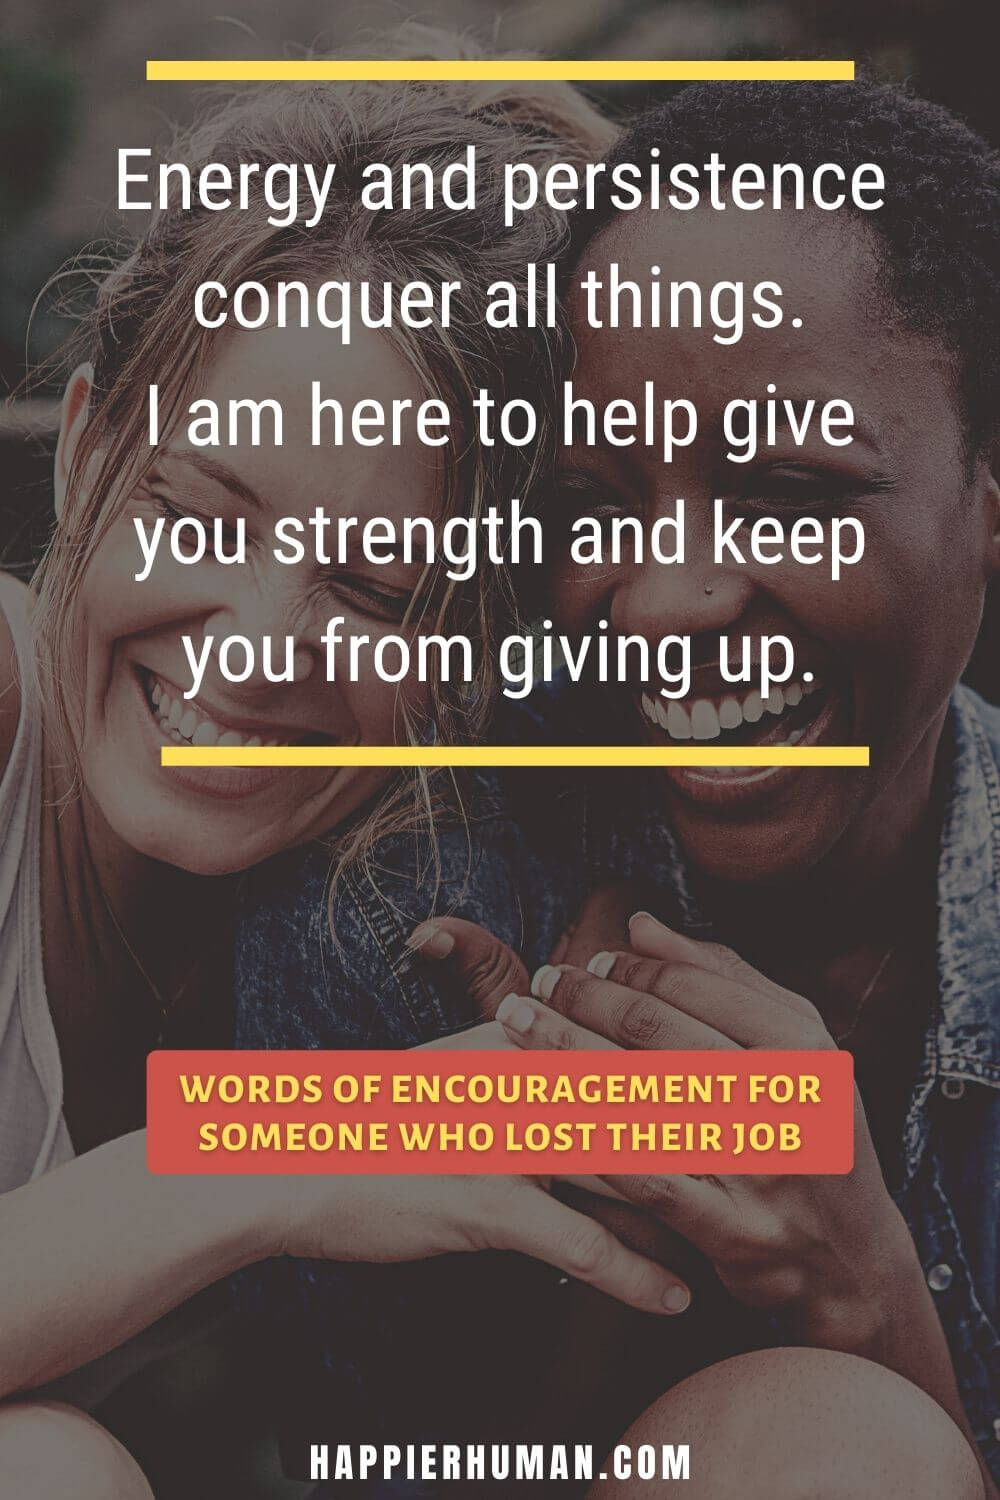 55 Words of Encouragement for Someone Who Lost Their Job - Happier Human